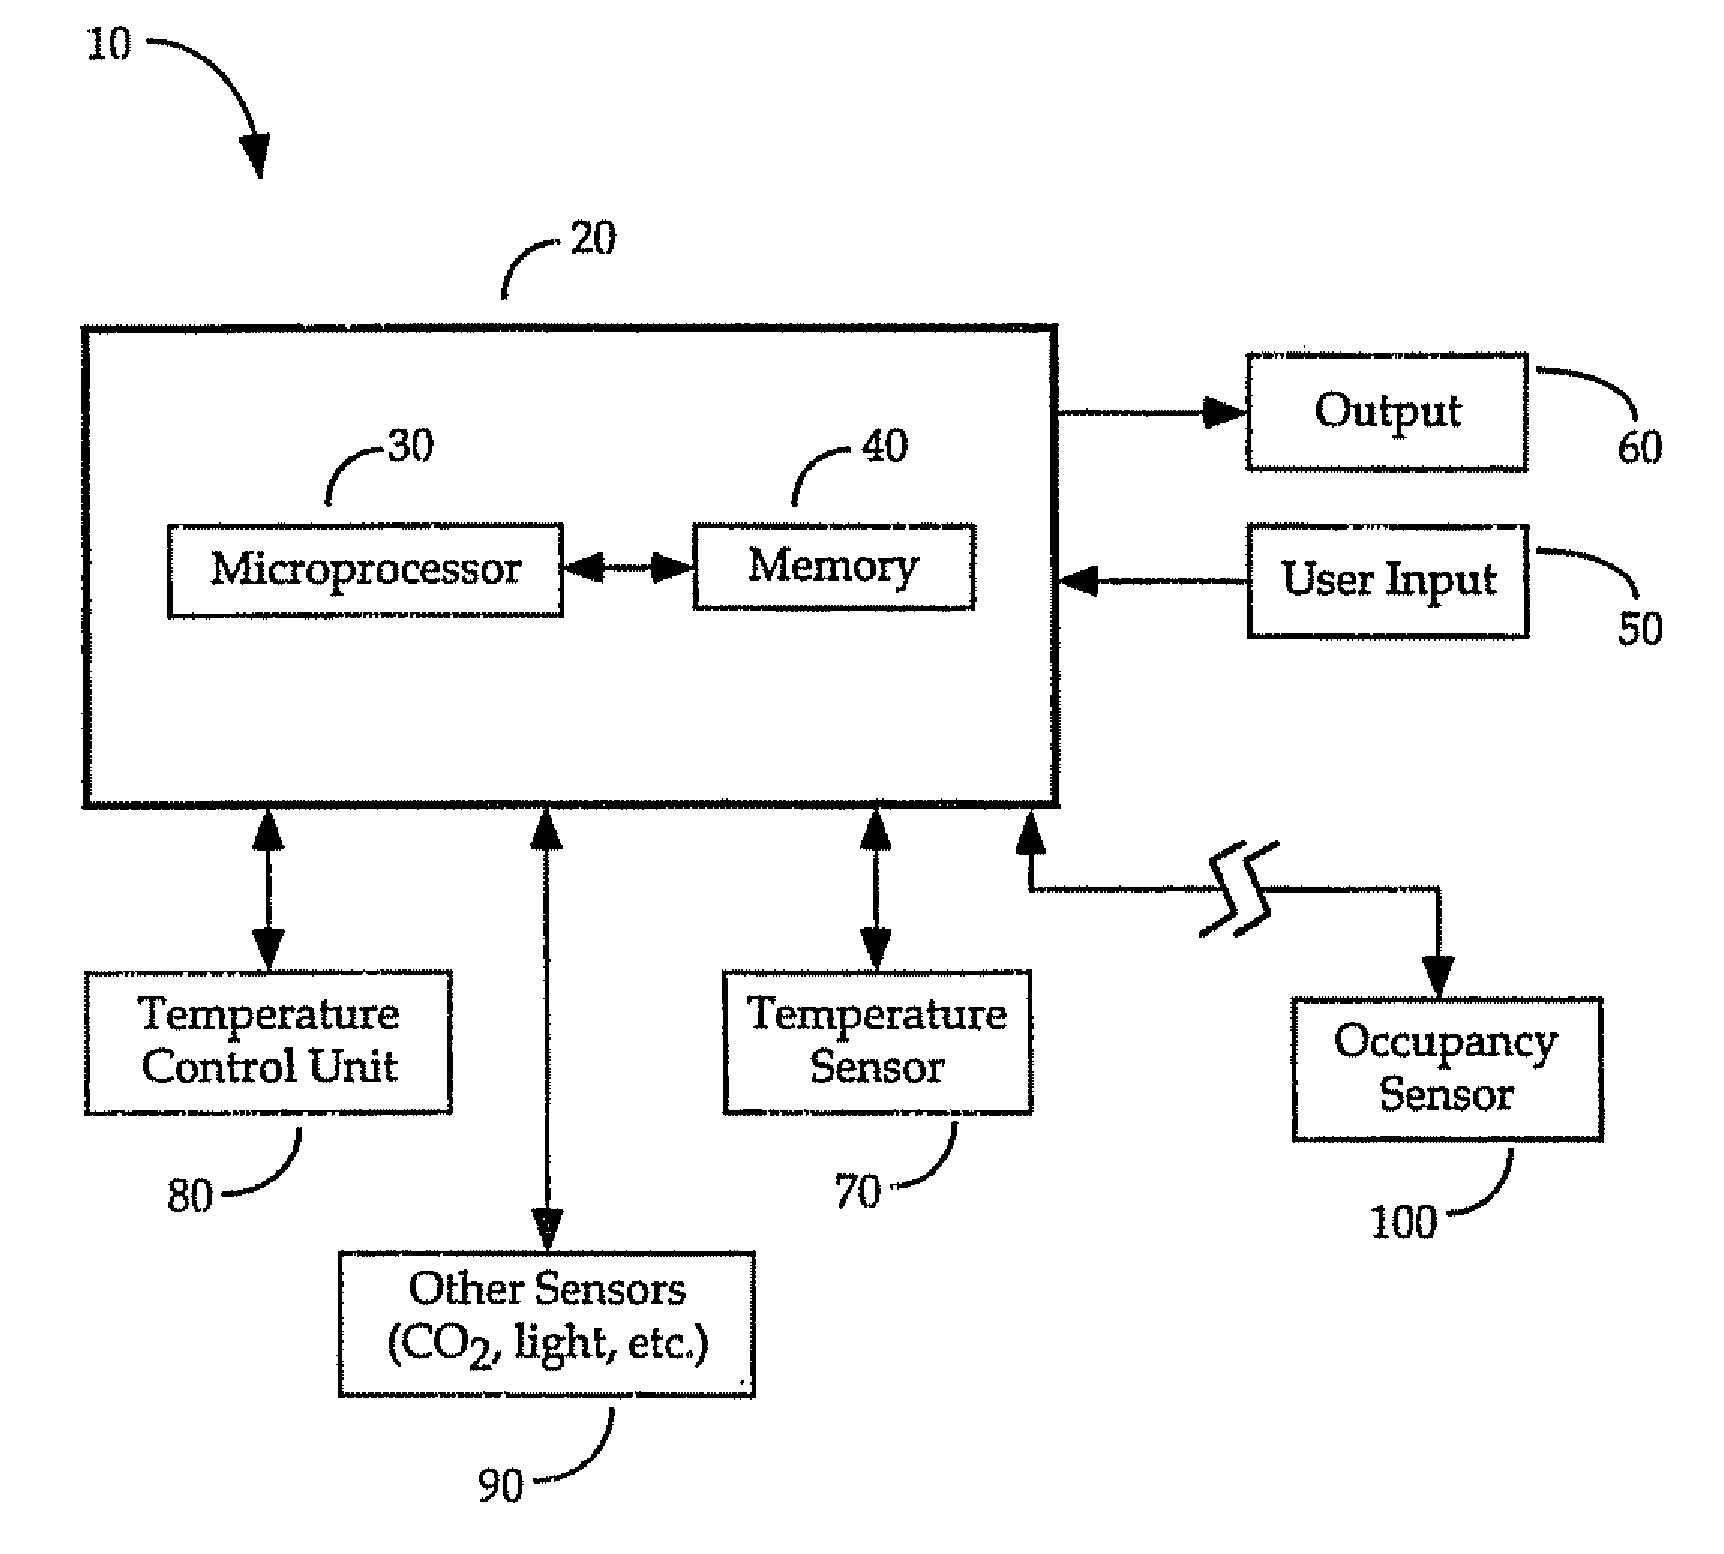 System and method for selecting an operating level of a heating, ventilation, and air conditioning system